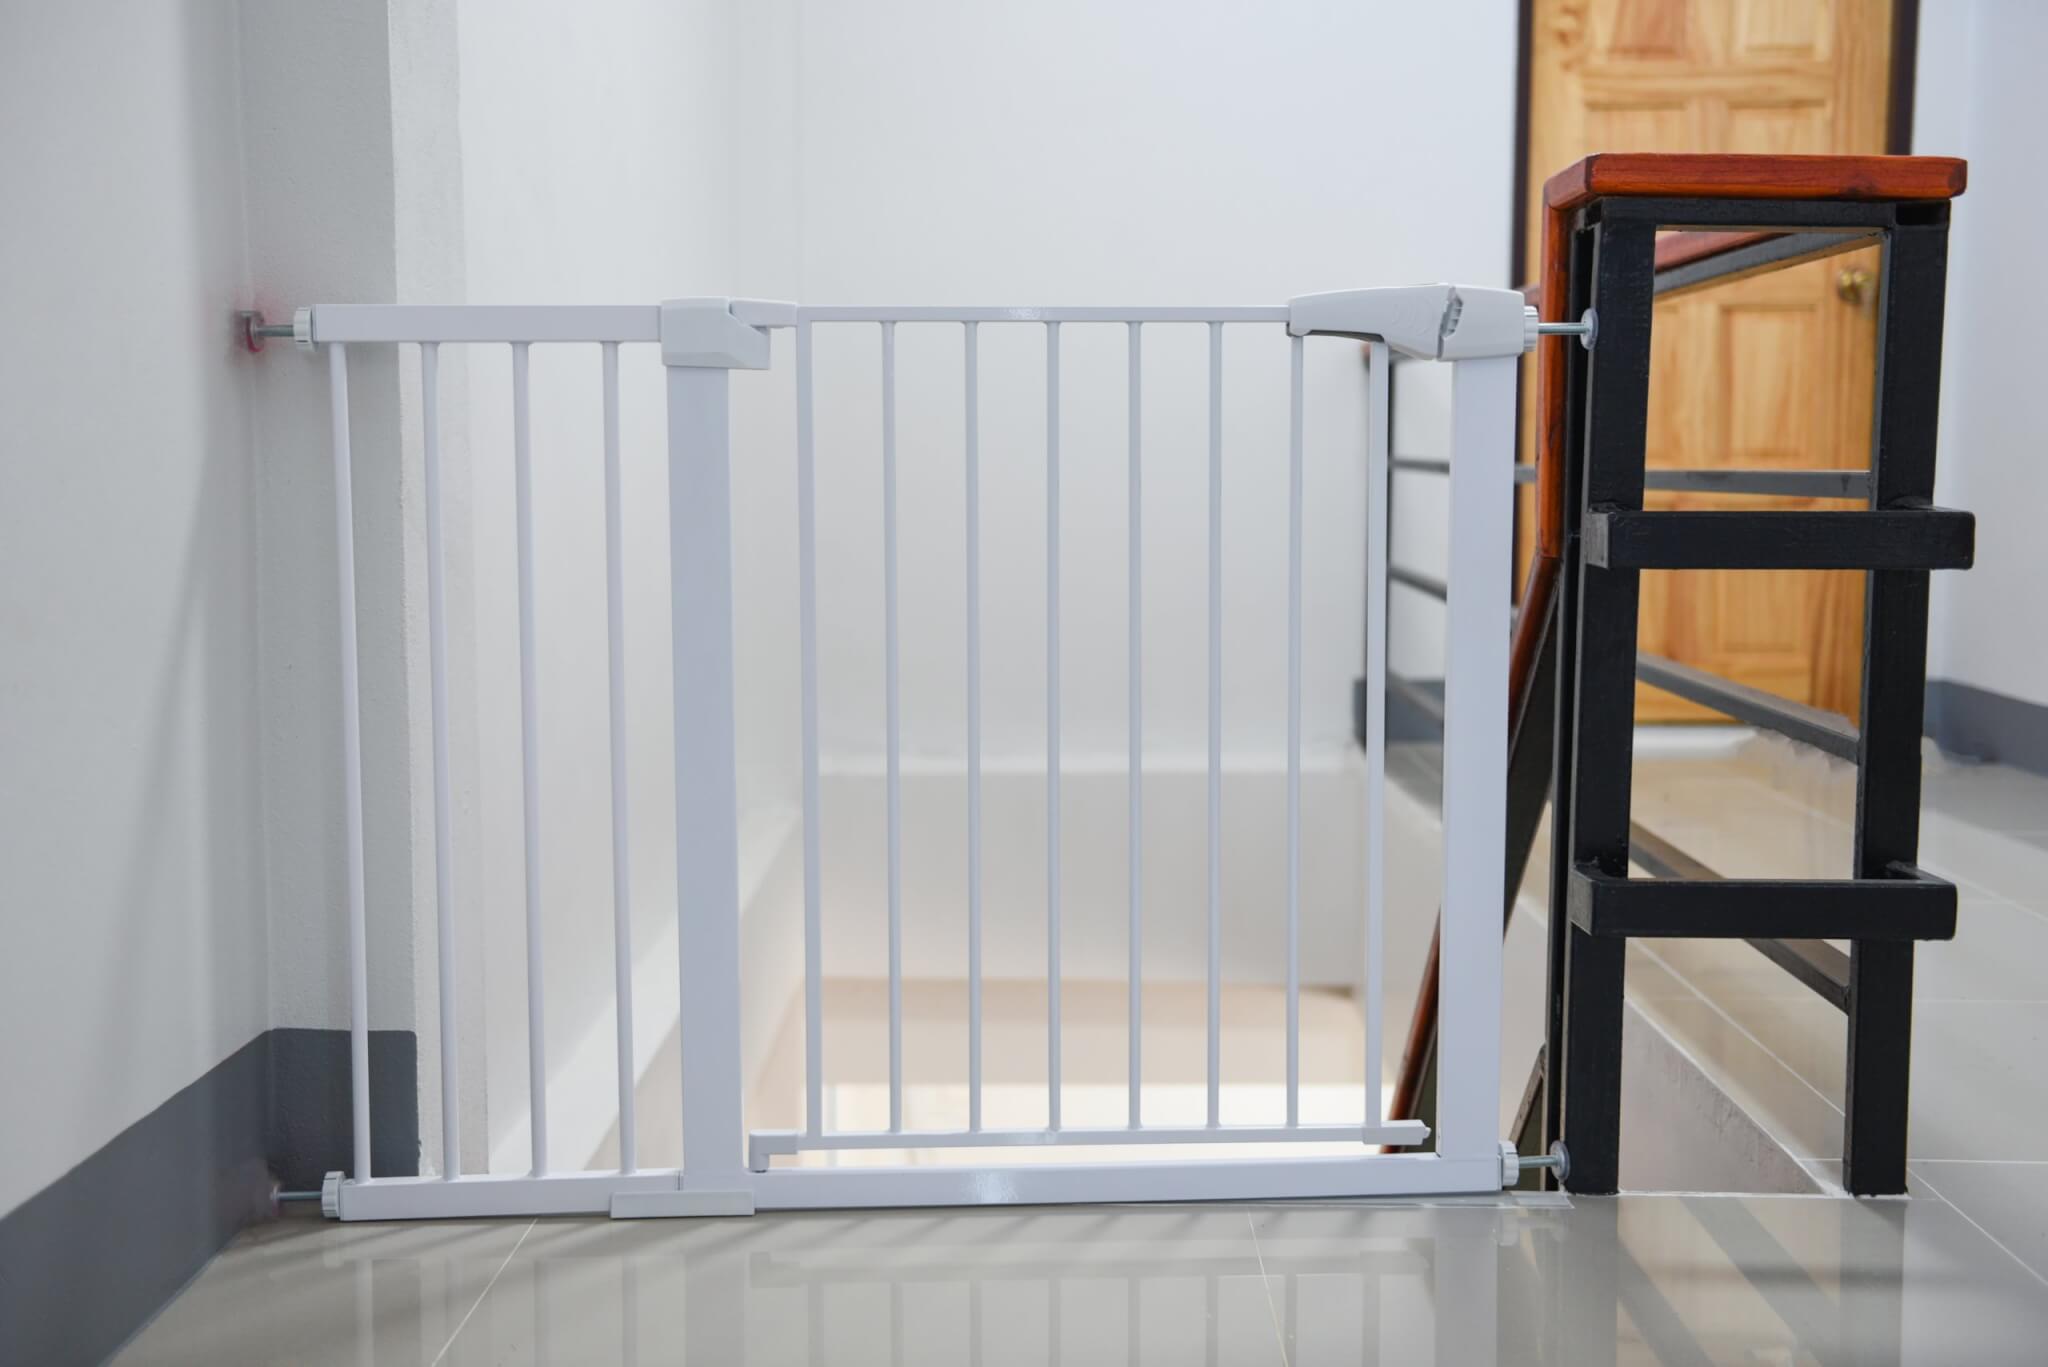 Protect small vacation rental guests by installing gates at the top of staircases